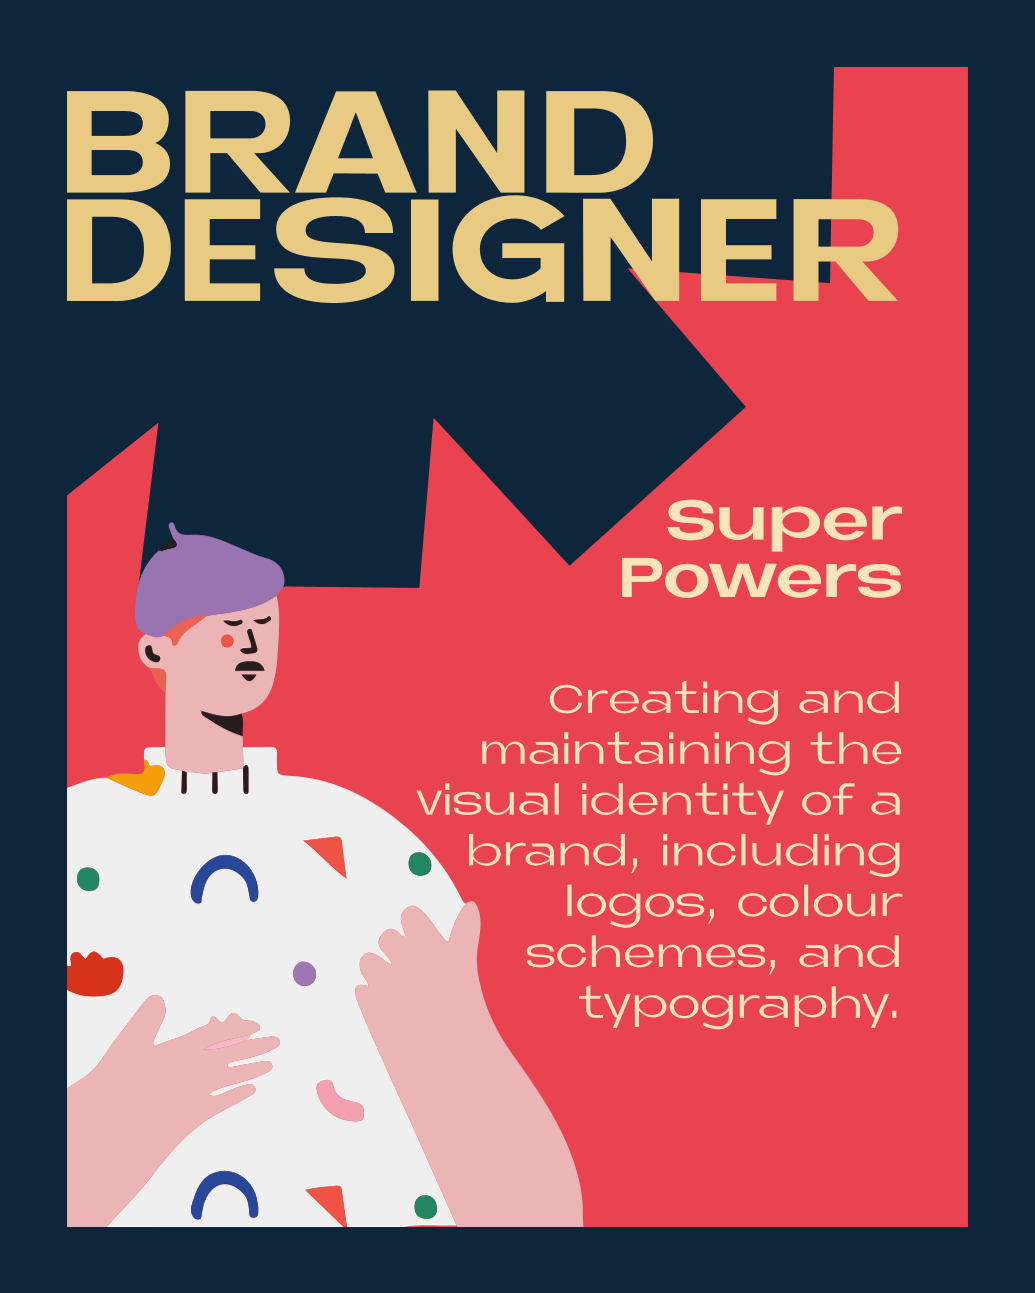 BRAND DESIGNER – Super Powers: Creating and maintaining the Visual identity of a brand, including logos, colour schemes, and typography.
